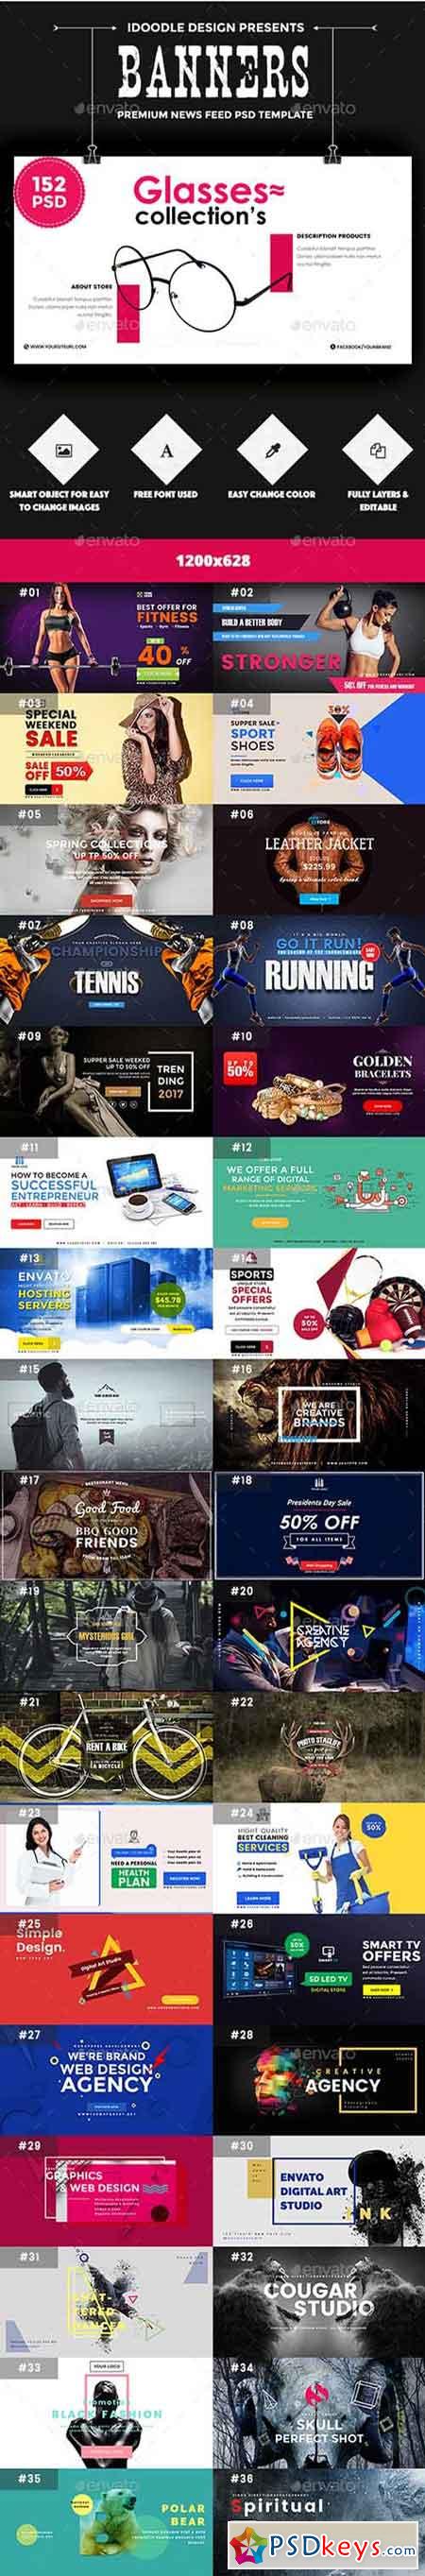 Promotion NewsFeed Ads - 152 PSD [02 Size Each] 15295067